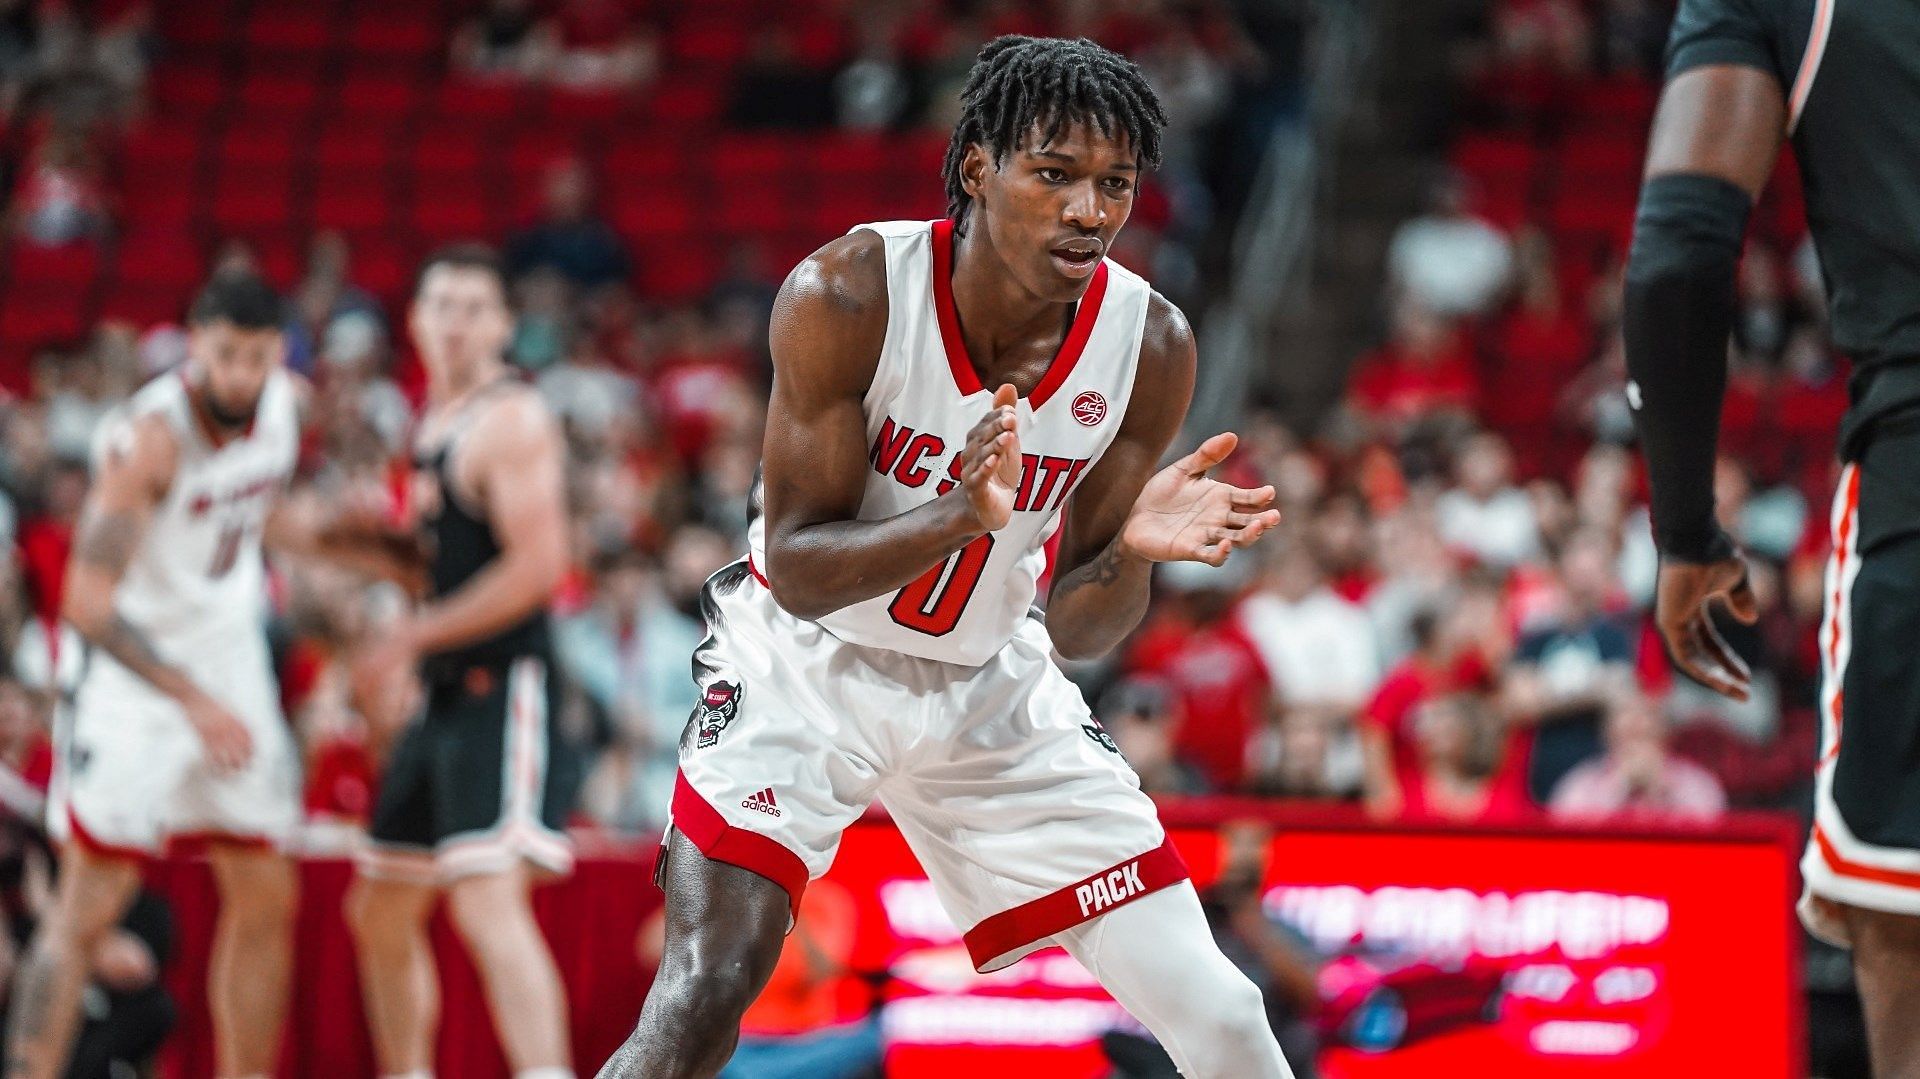 N.C. State sophomore Terquavion Smith put on a show against Duke.